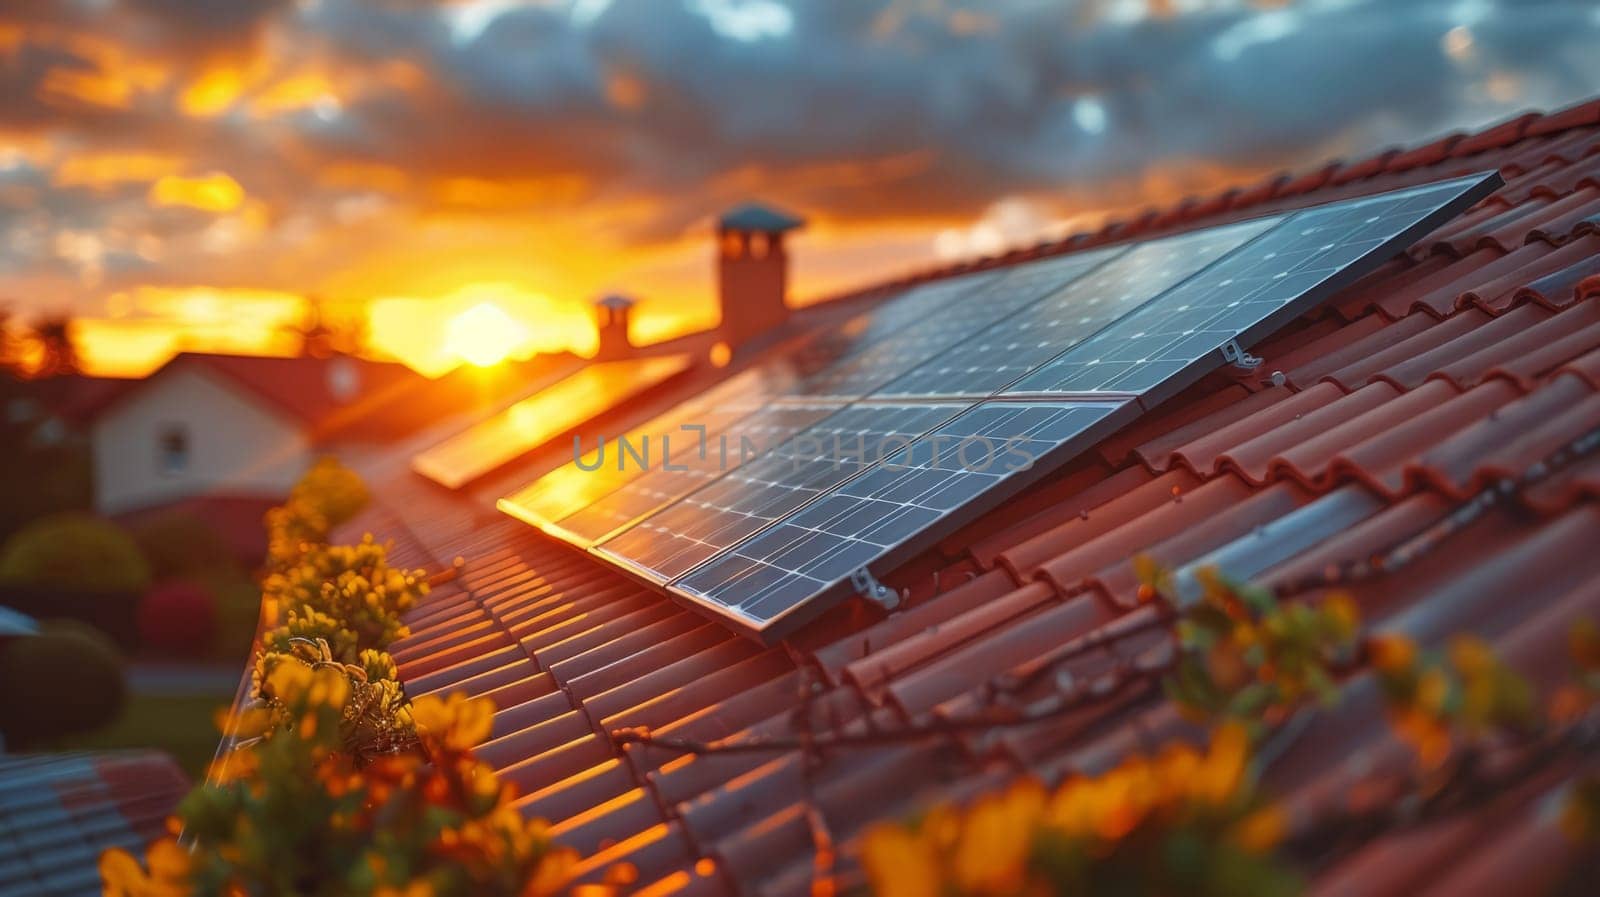 Solar Panels on House Roof at Sunset. Solar Energy Alternative Energy Renewable Concept. Photovoltaic Technology. Ai generated